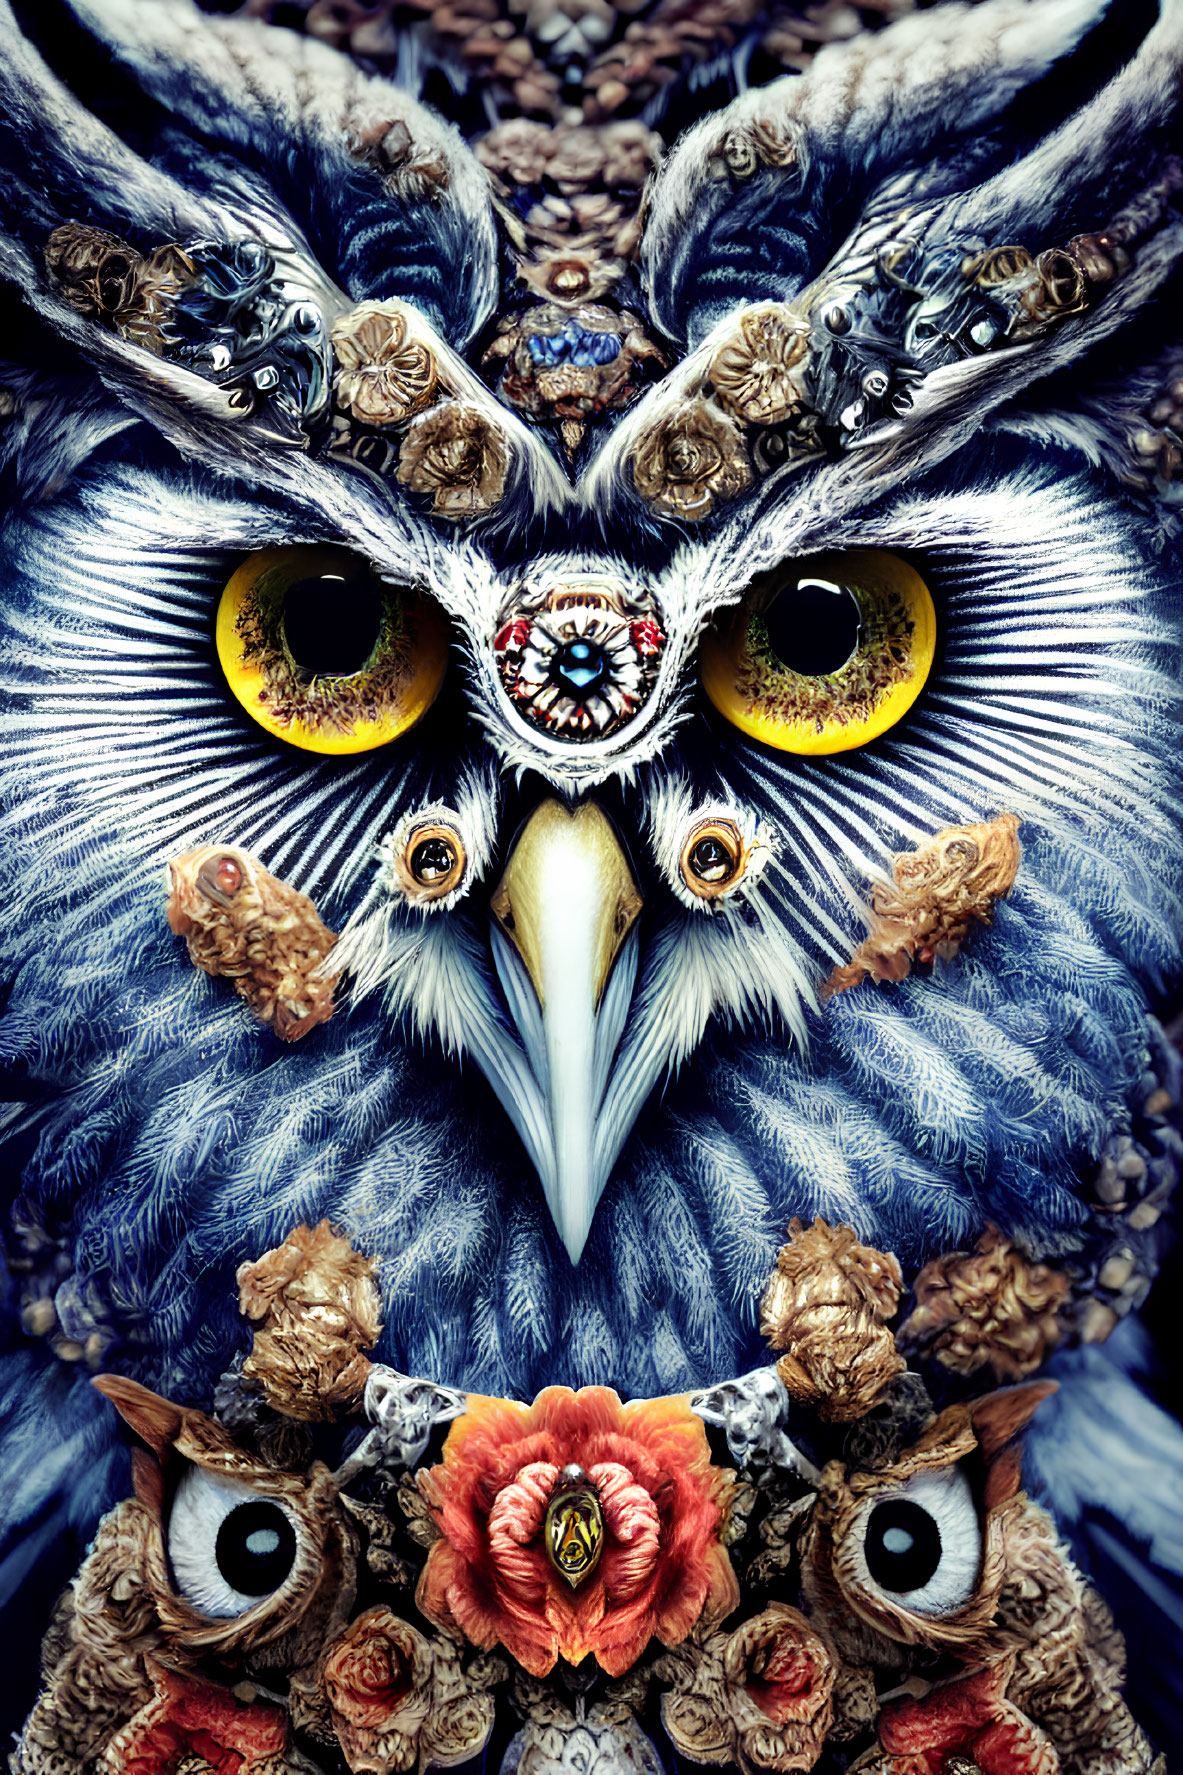 Symmetrical Owl Faces with Yellow Eyes and Floral Patterns